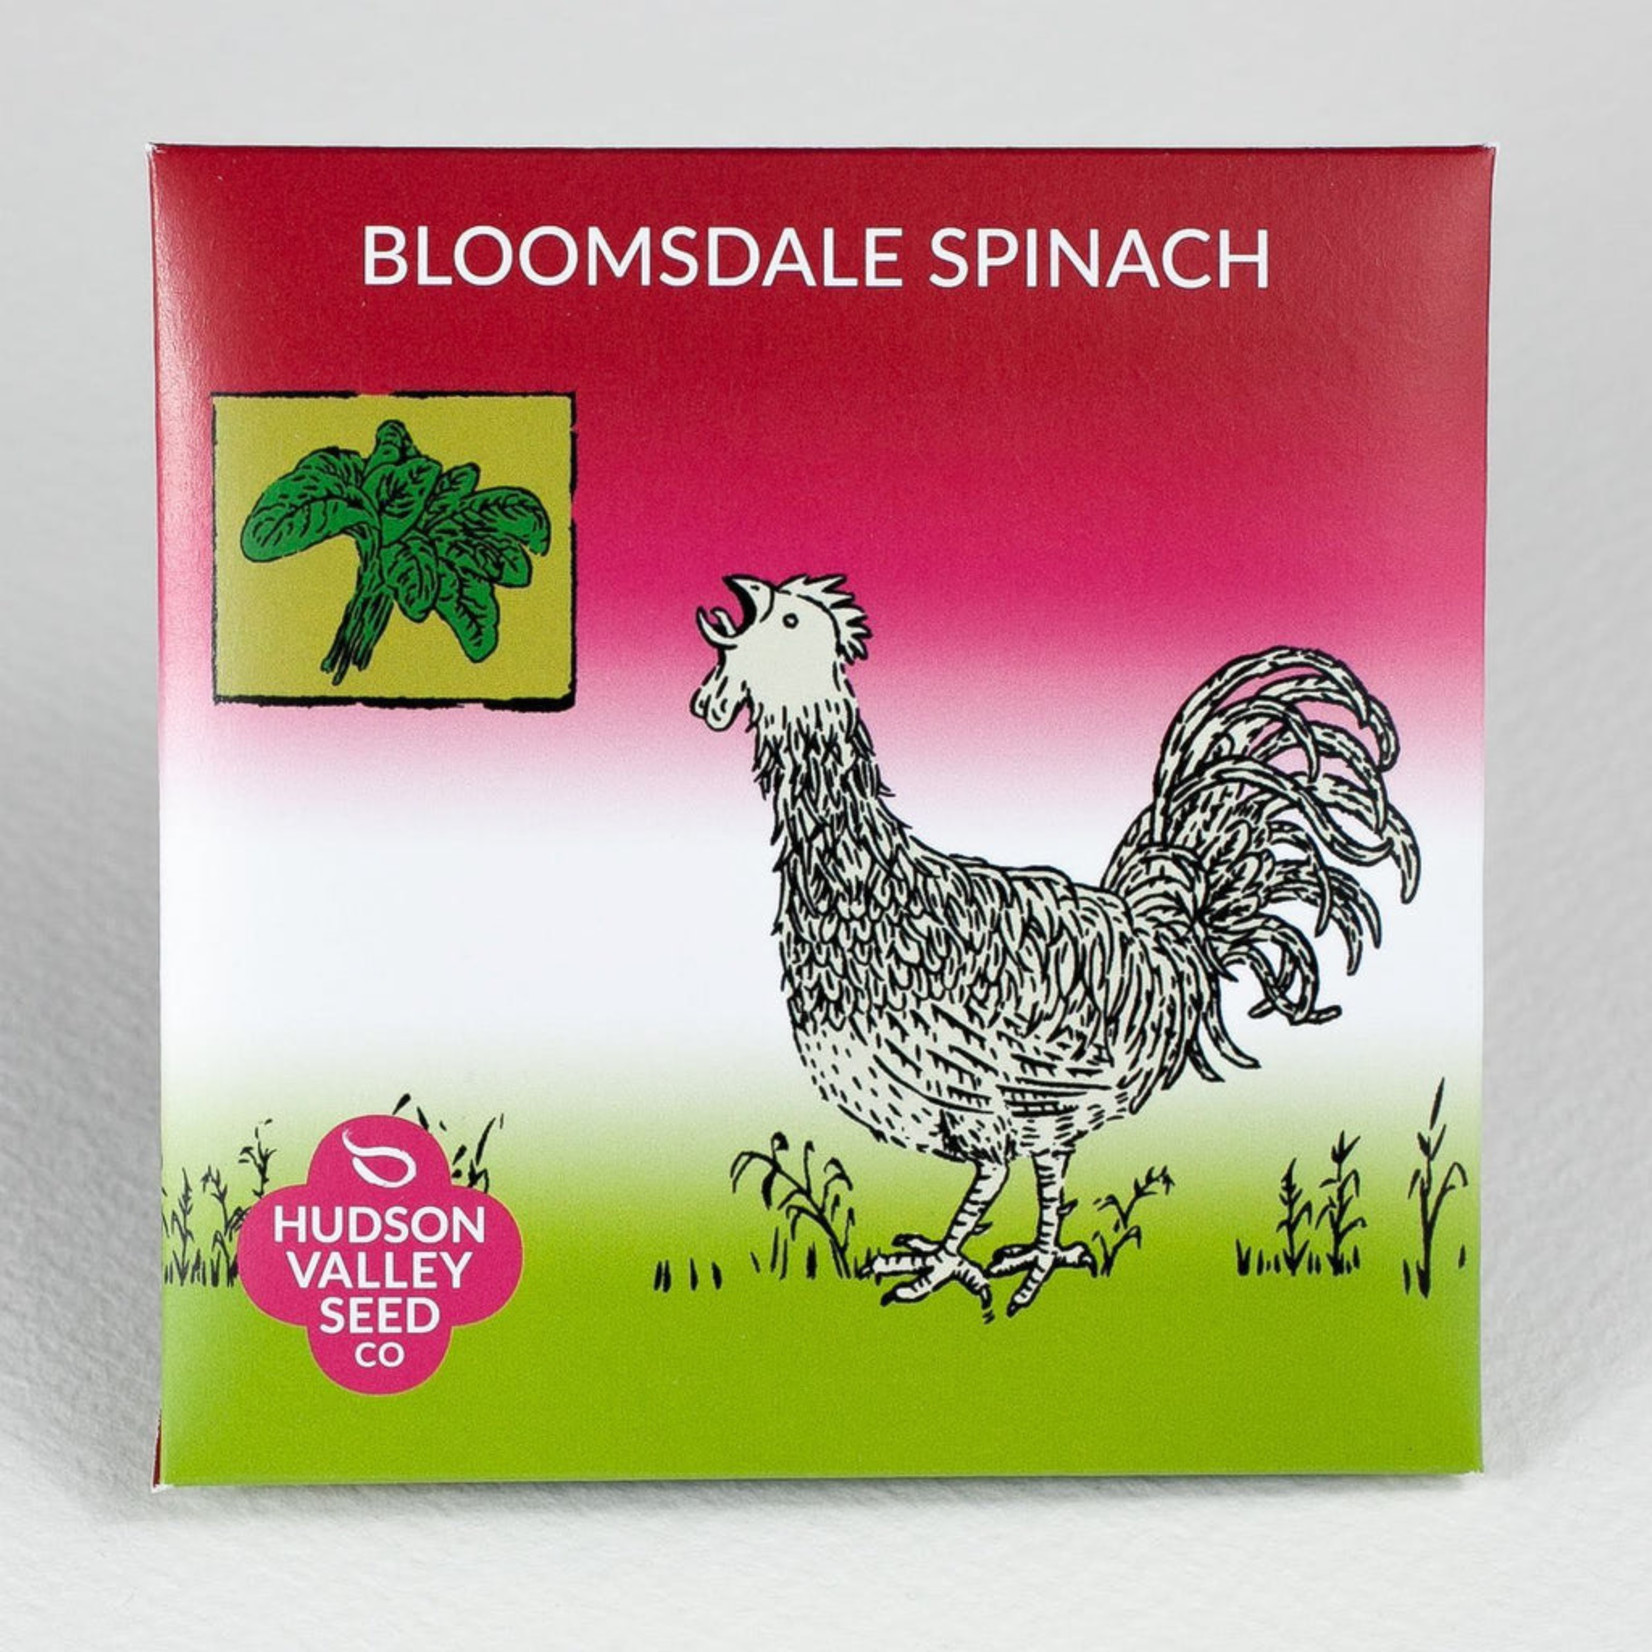 Hudson Valley Seeds Bloomsdale Spinach